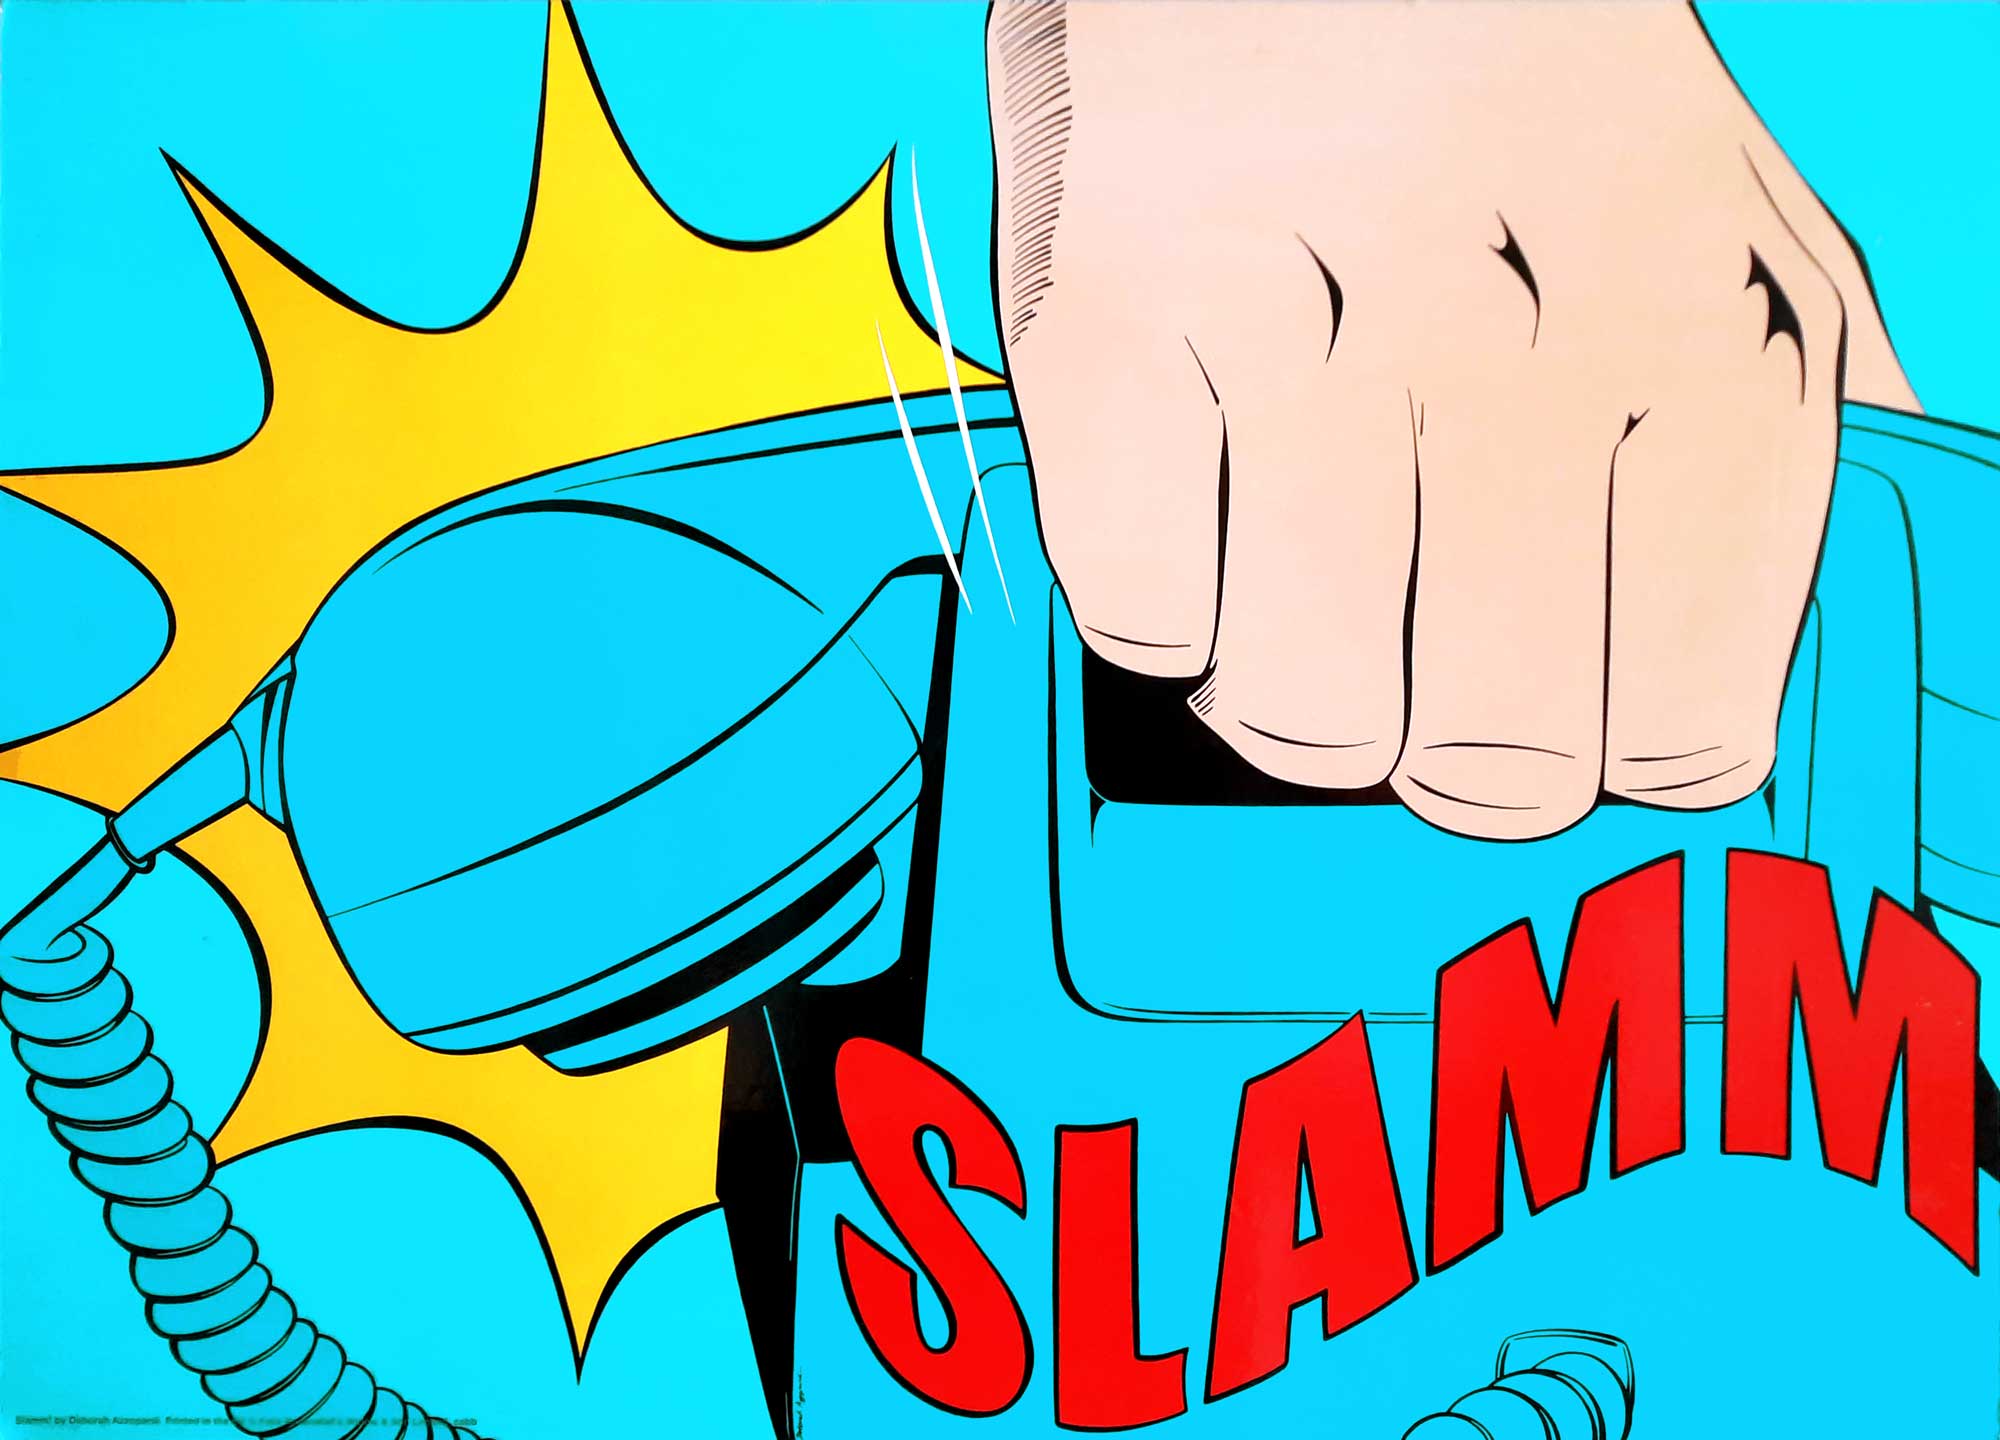 Featured image for “Slamm”